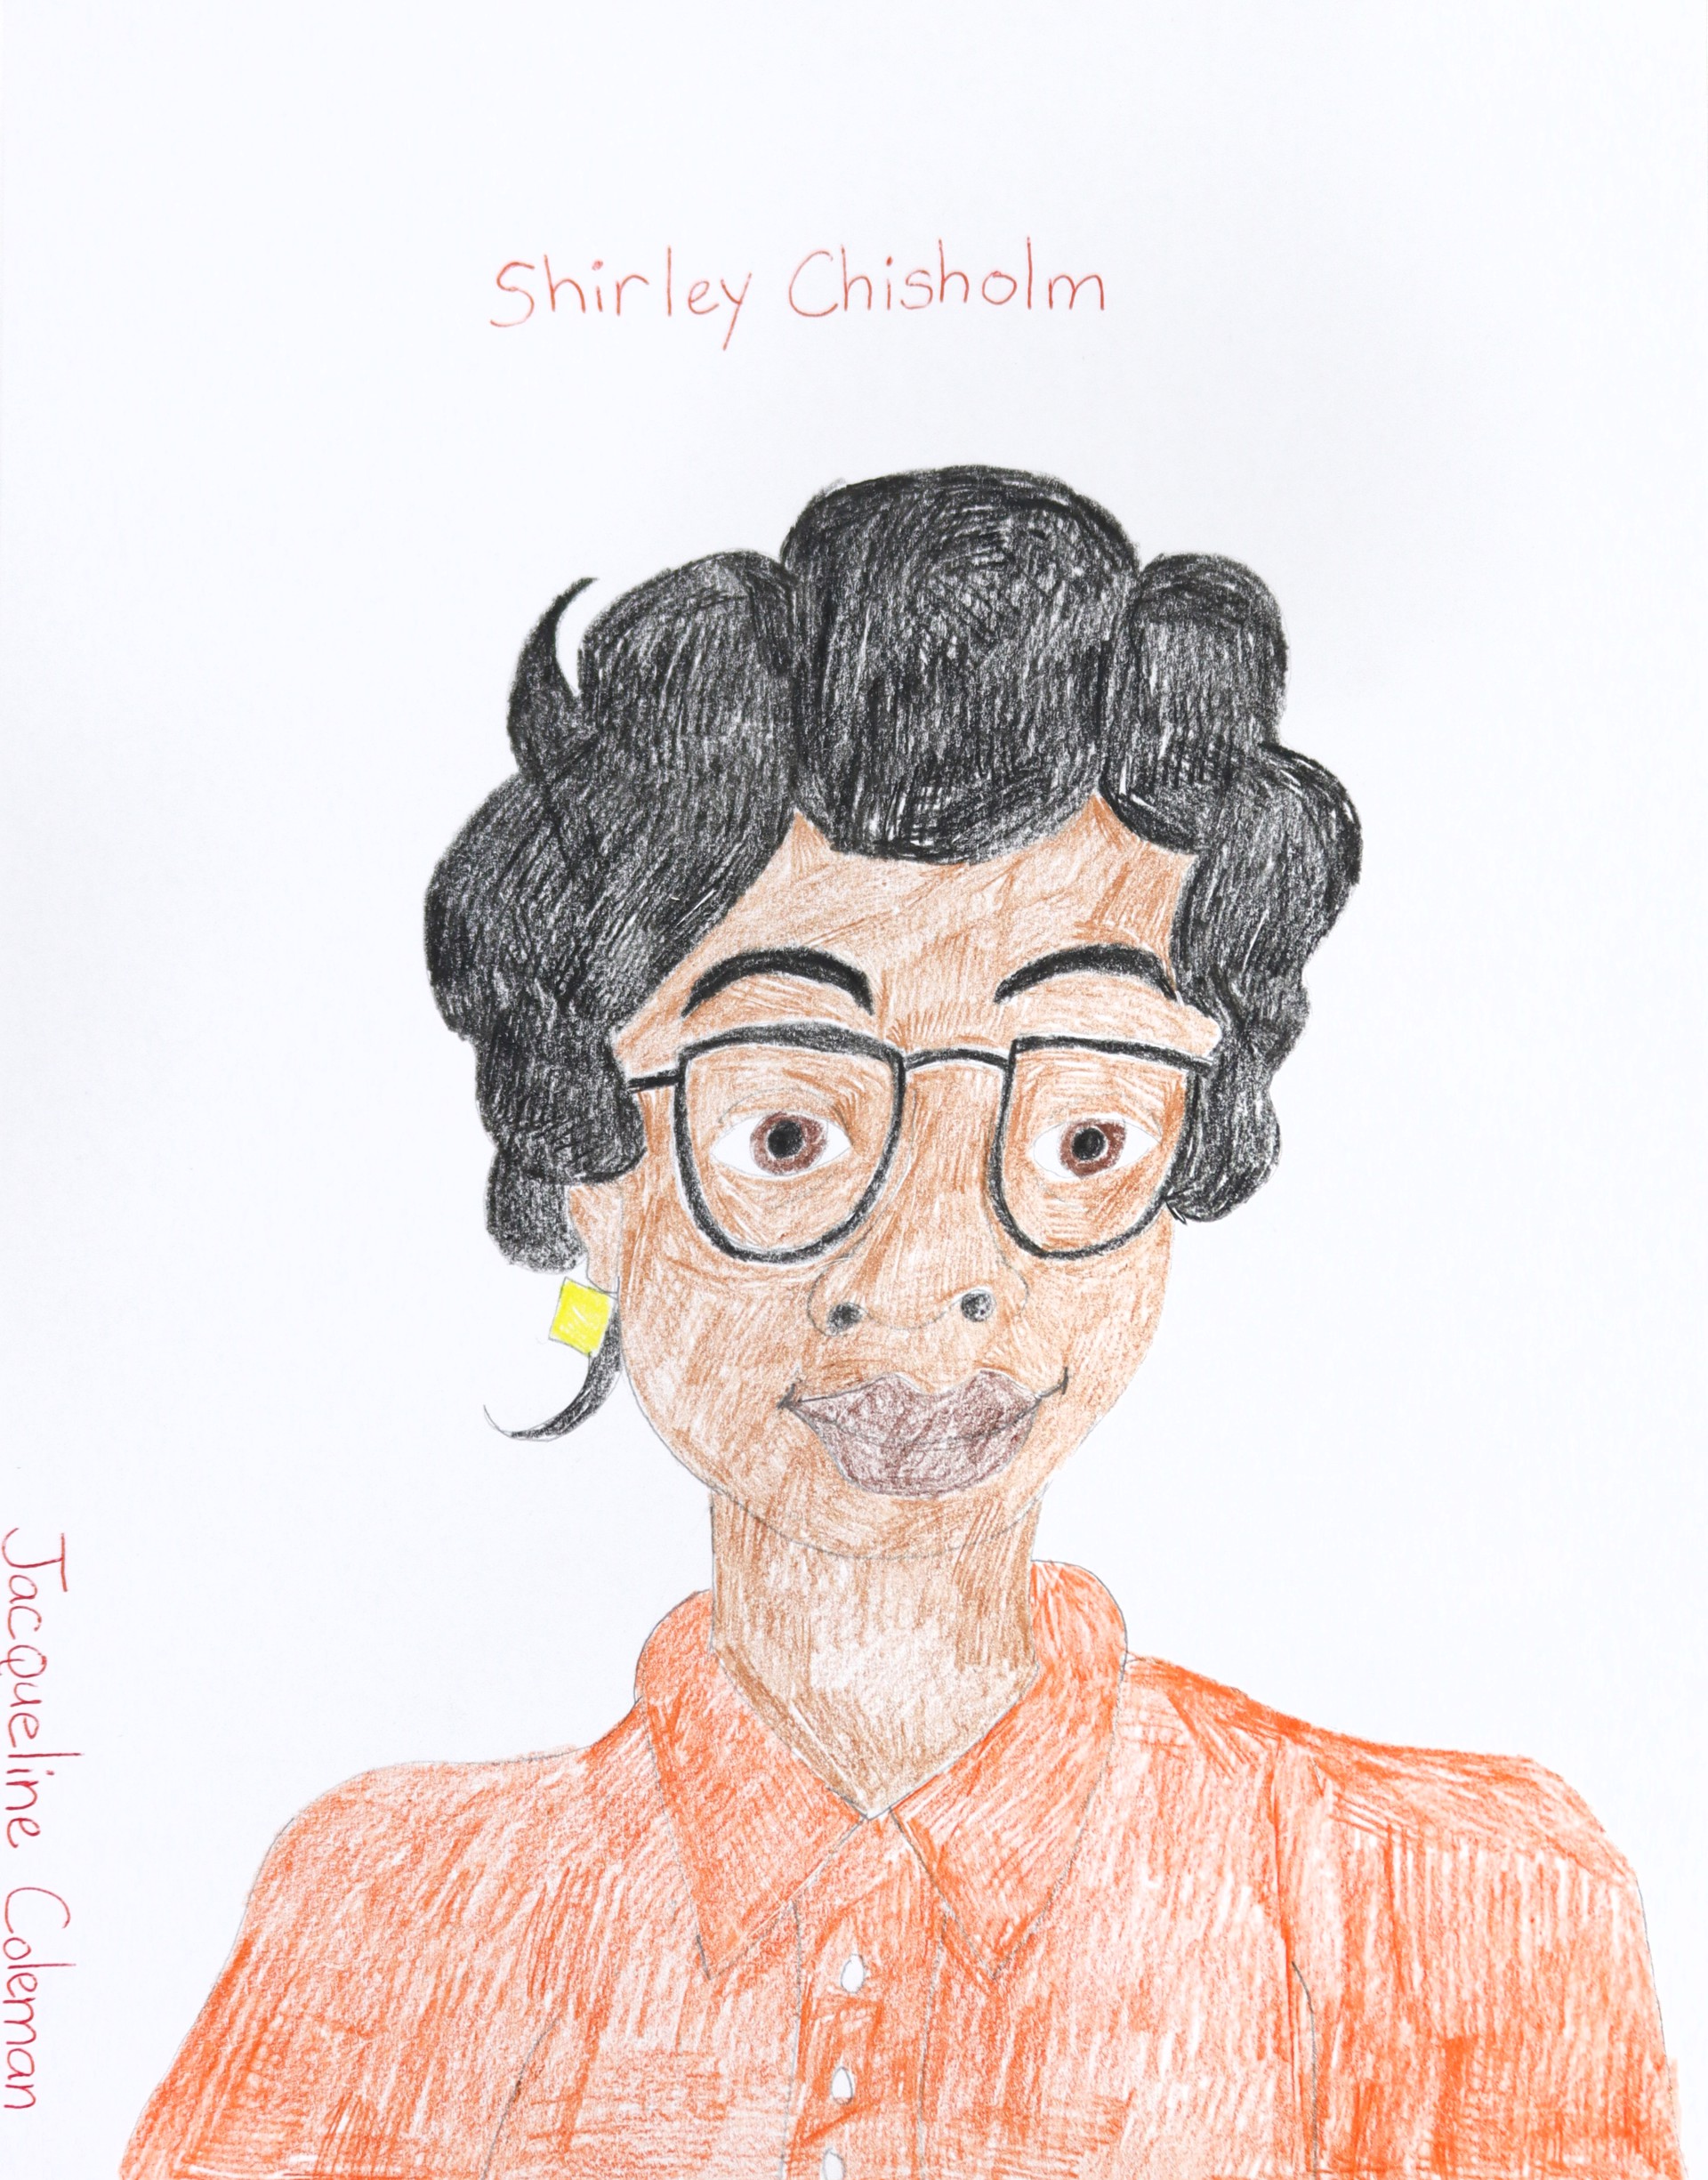 Shirley Chisholm by Jacqueline Coleman